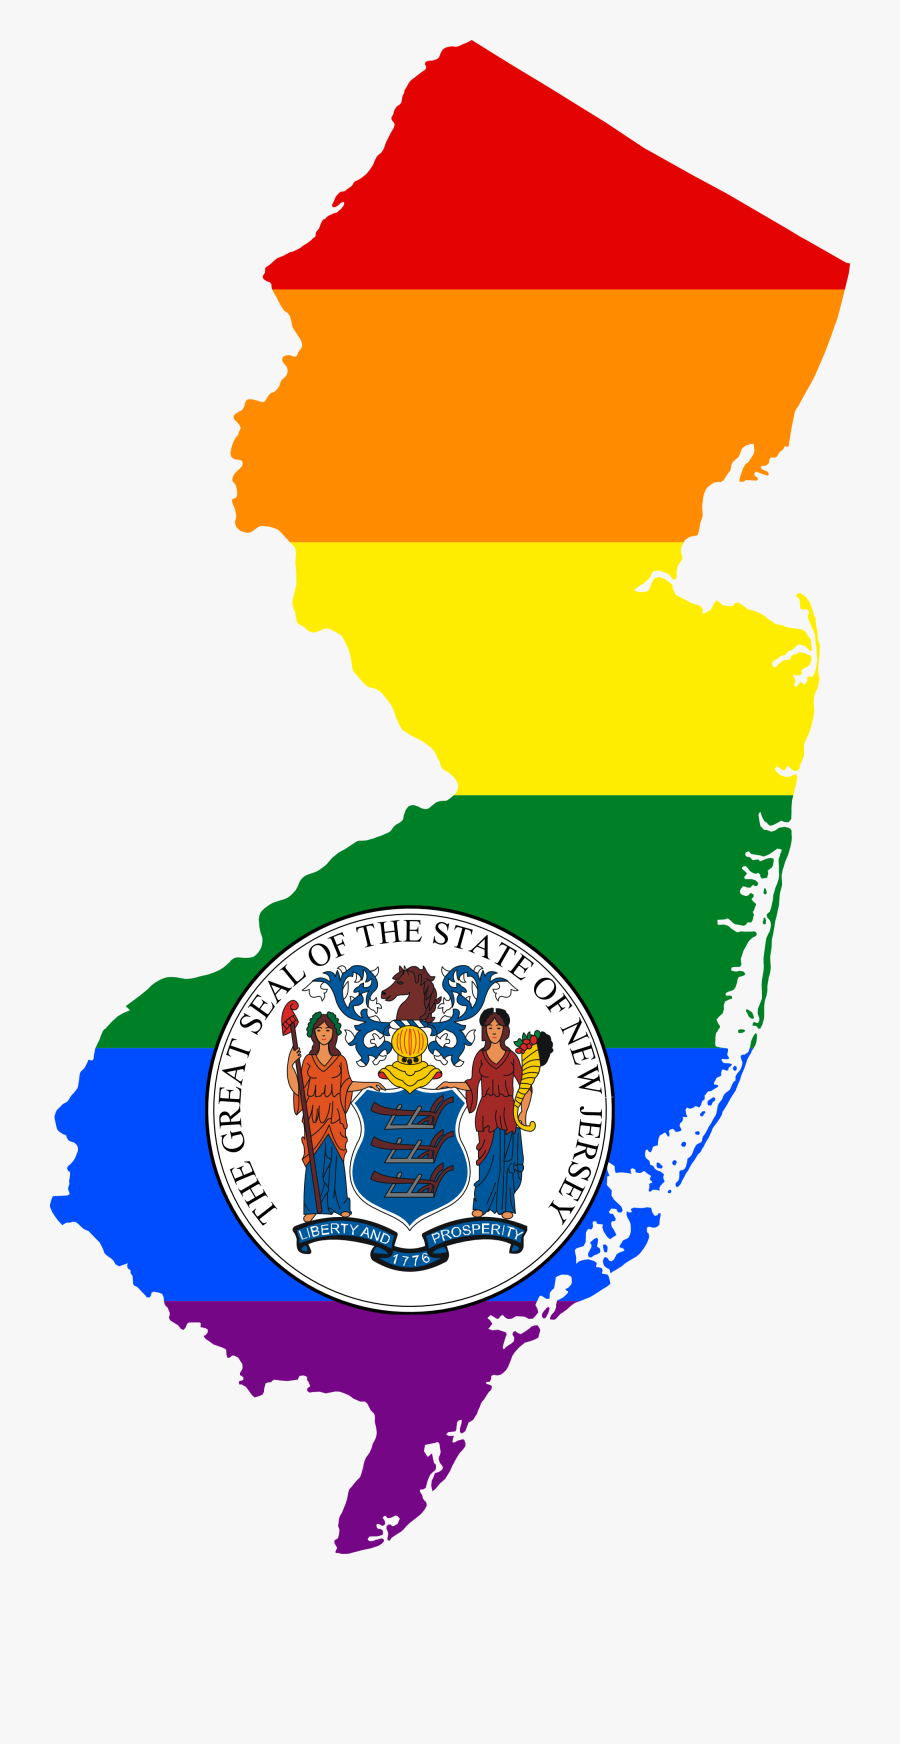 New Jersey Glbt - North Jersey South Jersey, Transparent Clipart